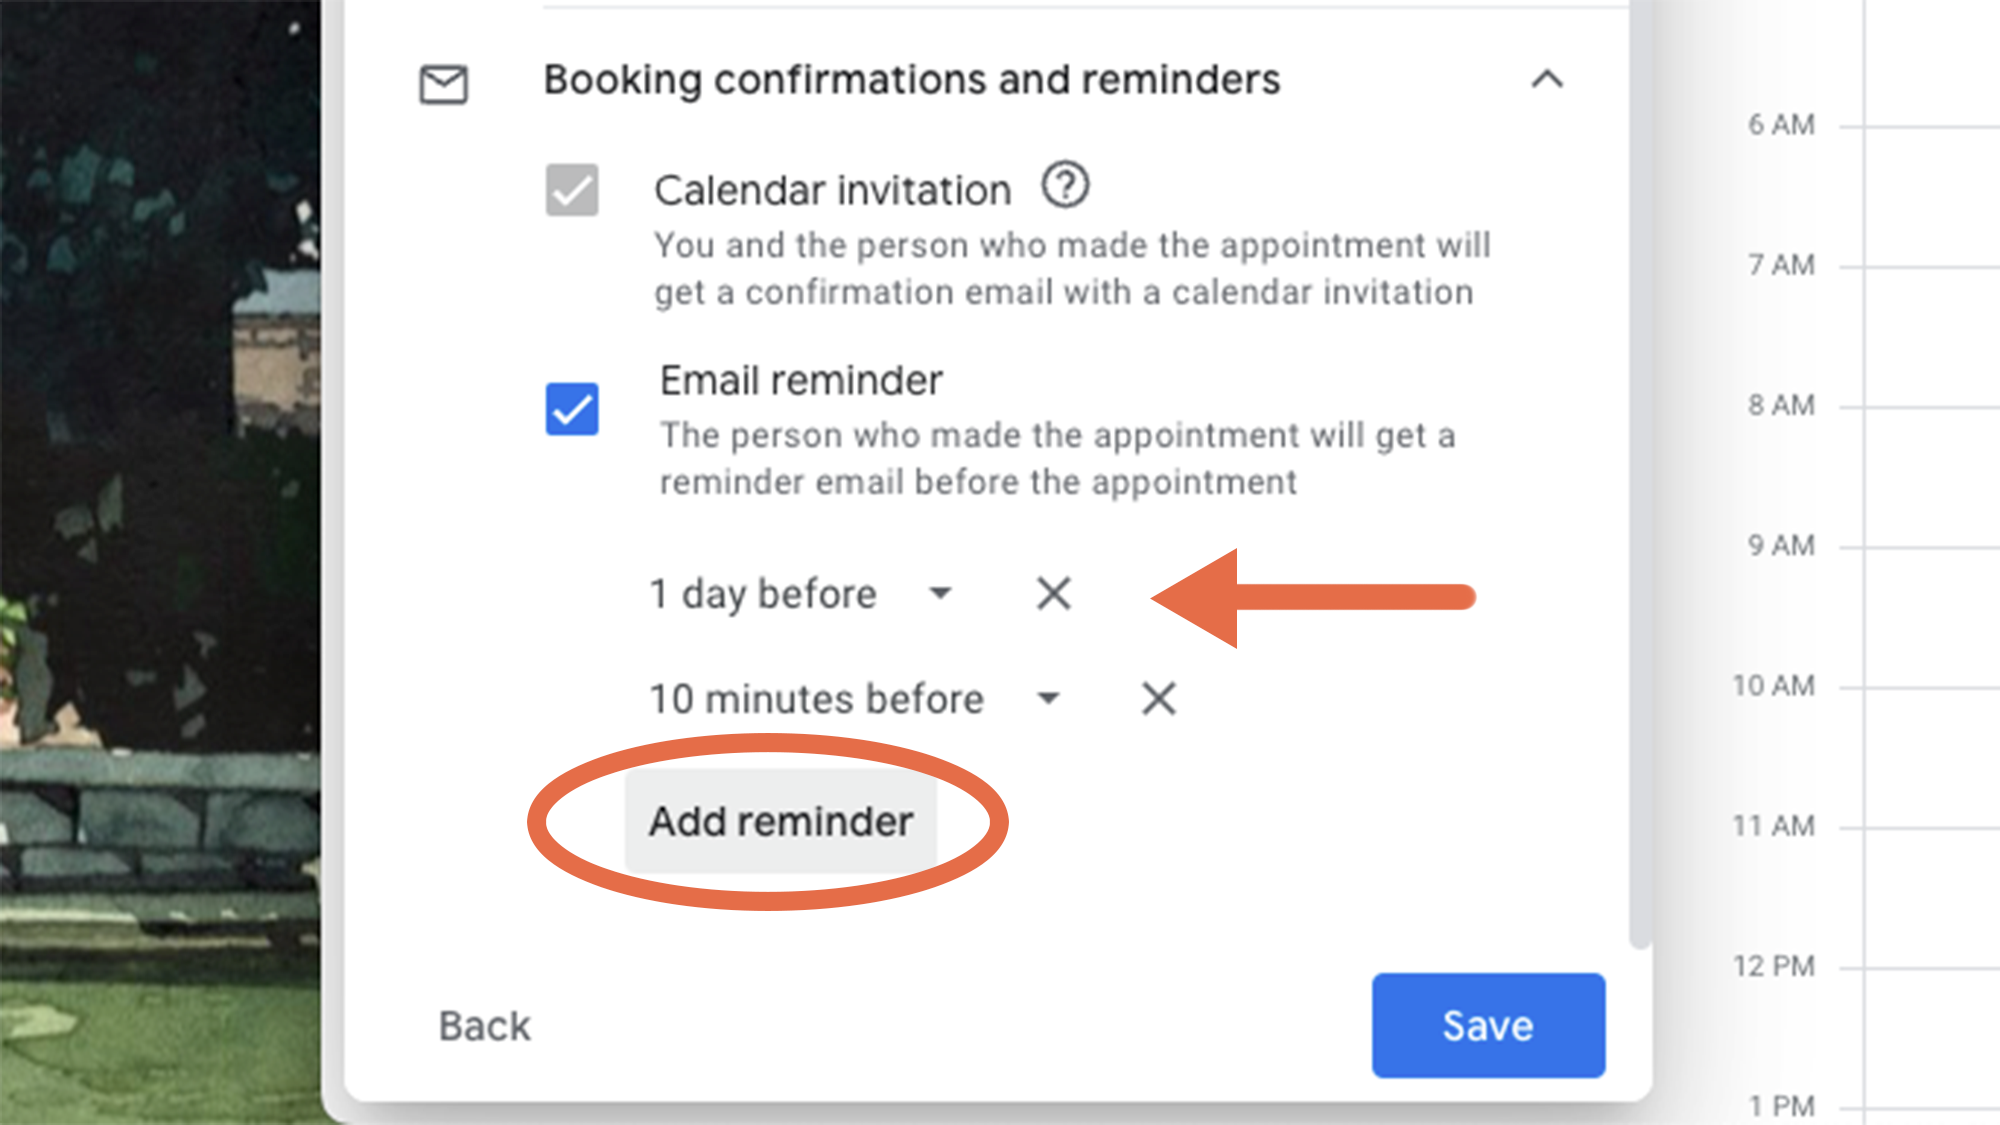 Google Calendar menu showing options to send reminders to people booking appointments with you.